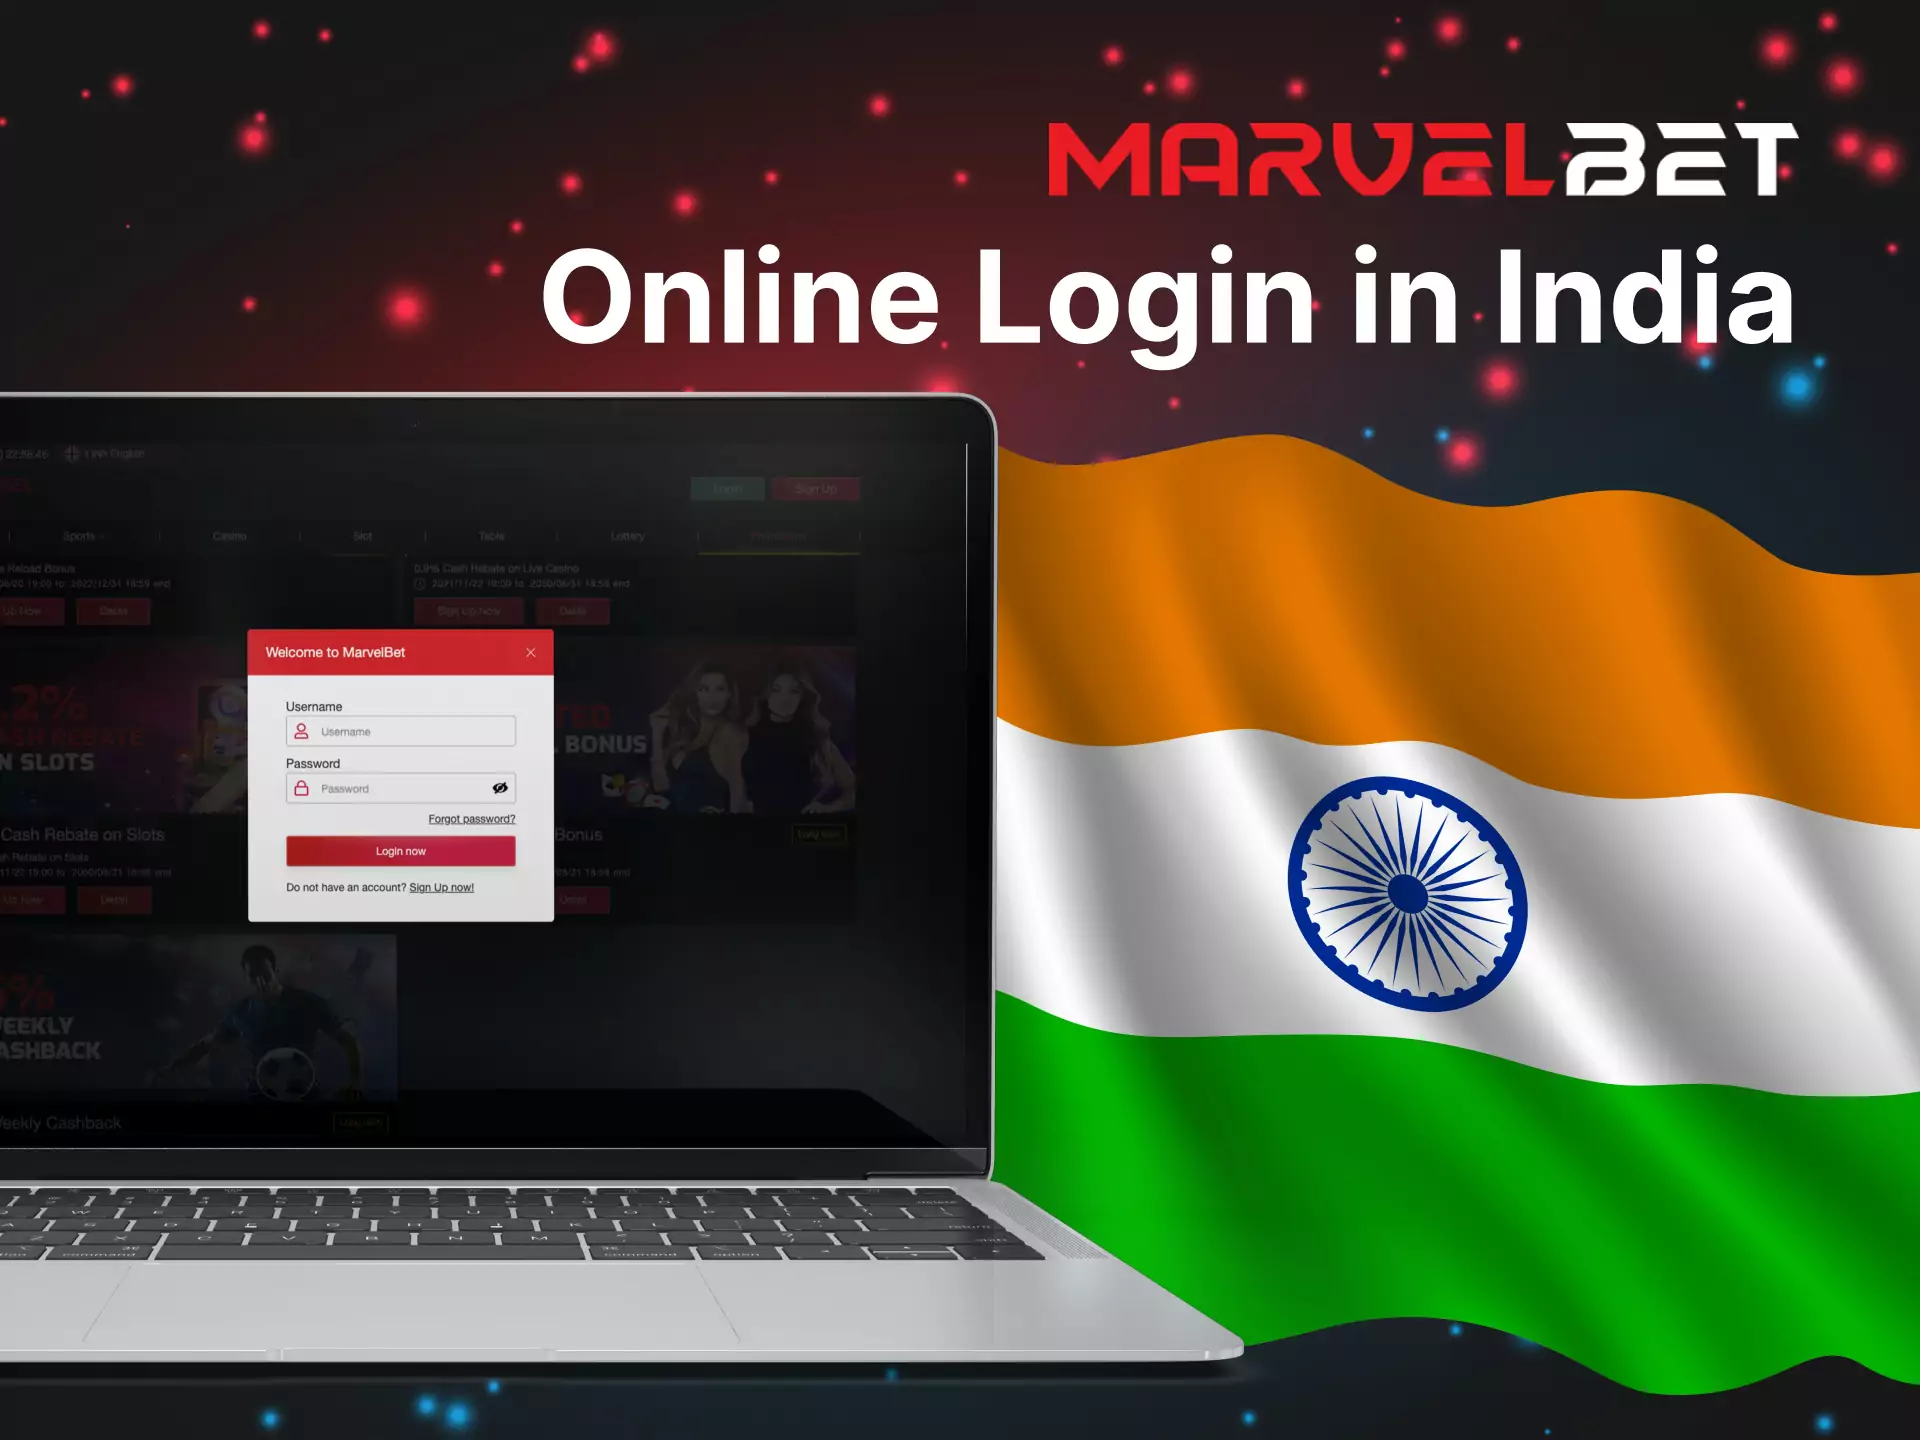 After you register, log into the account using your username and a password to Marvelbet.